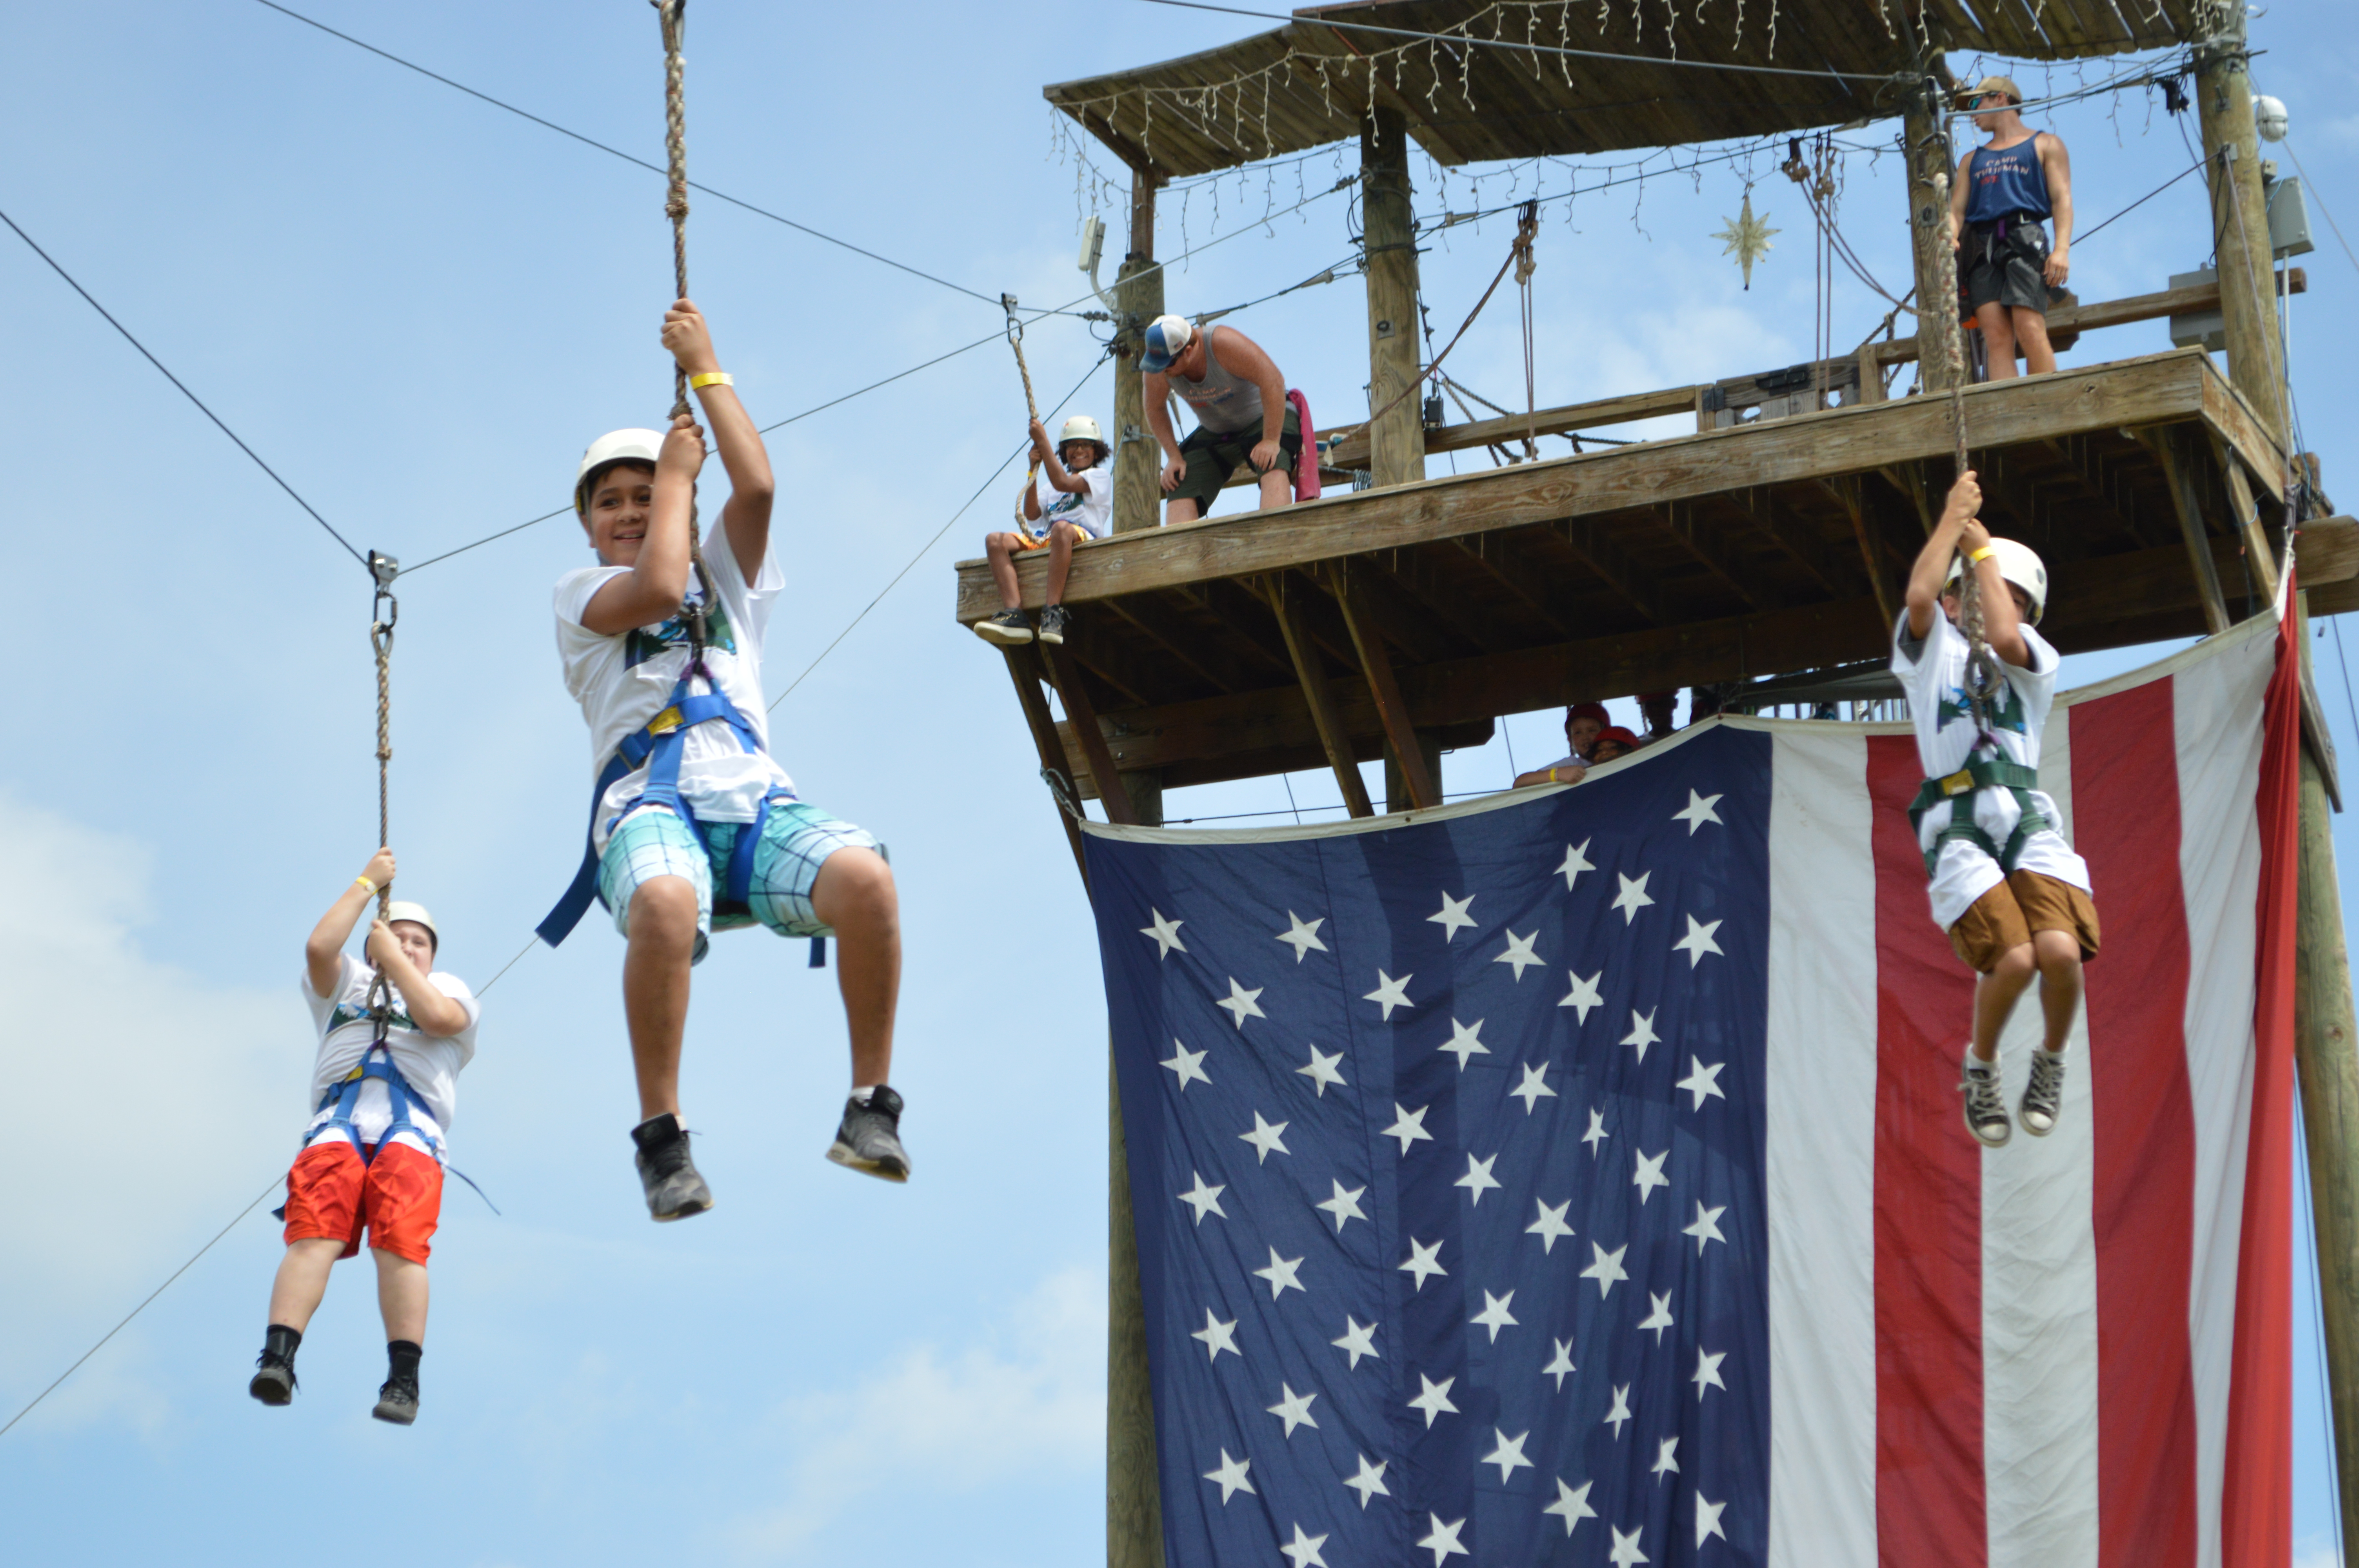 Zip lines are so much fun, and always a part of Mission Arlington camps. Thank you Camp Thurman for your partnership.